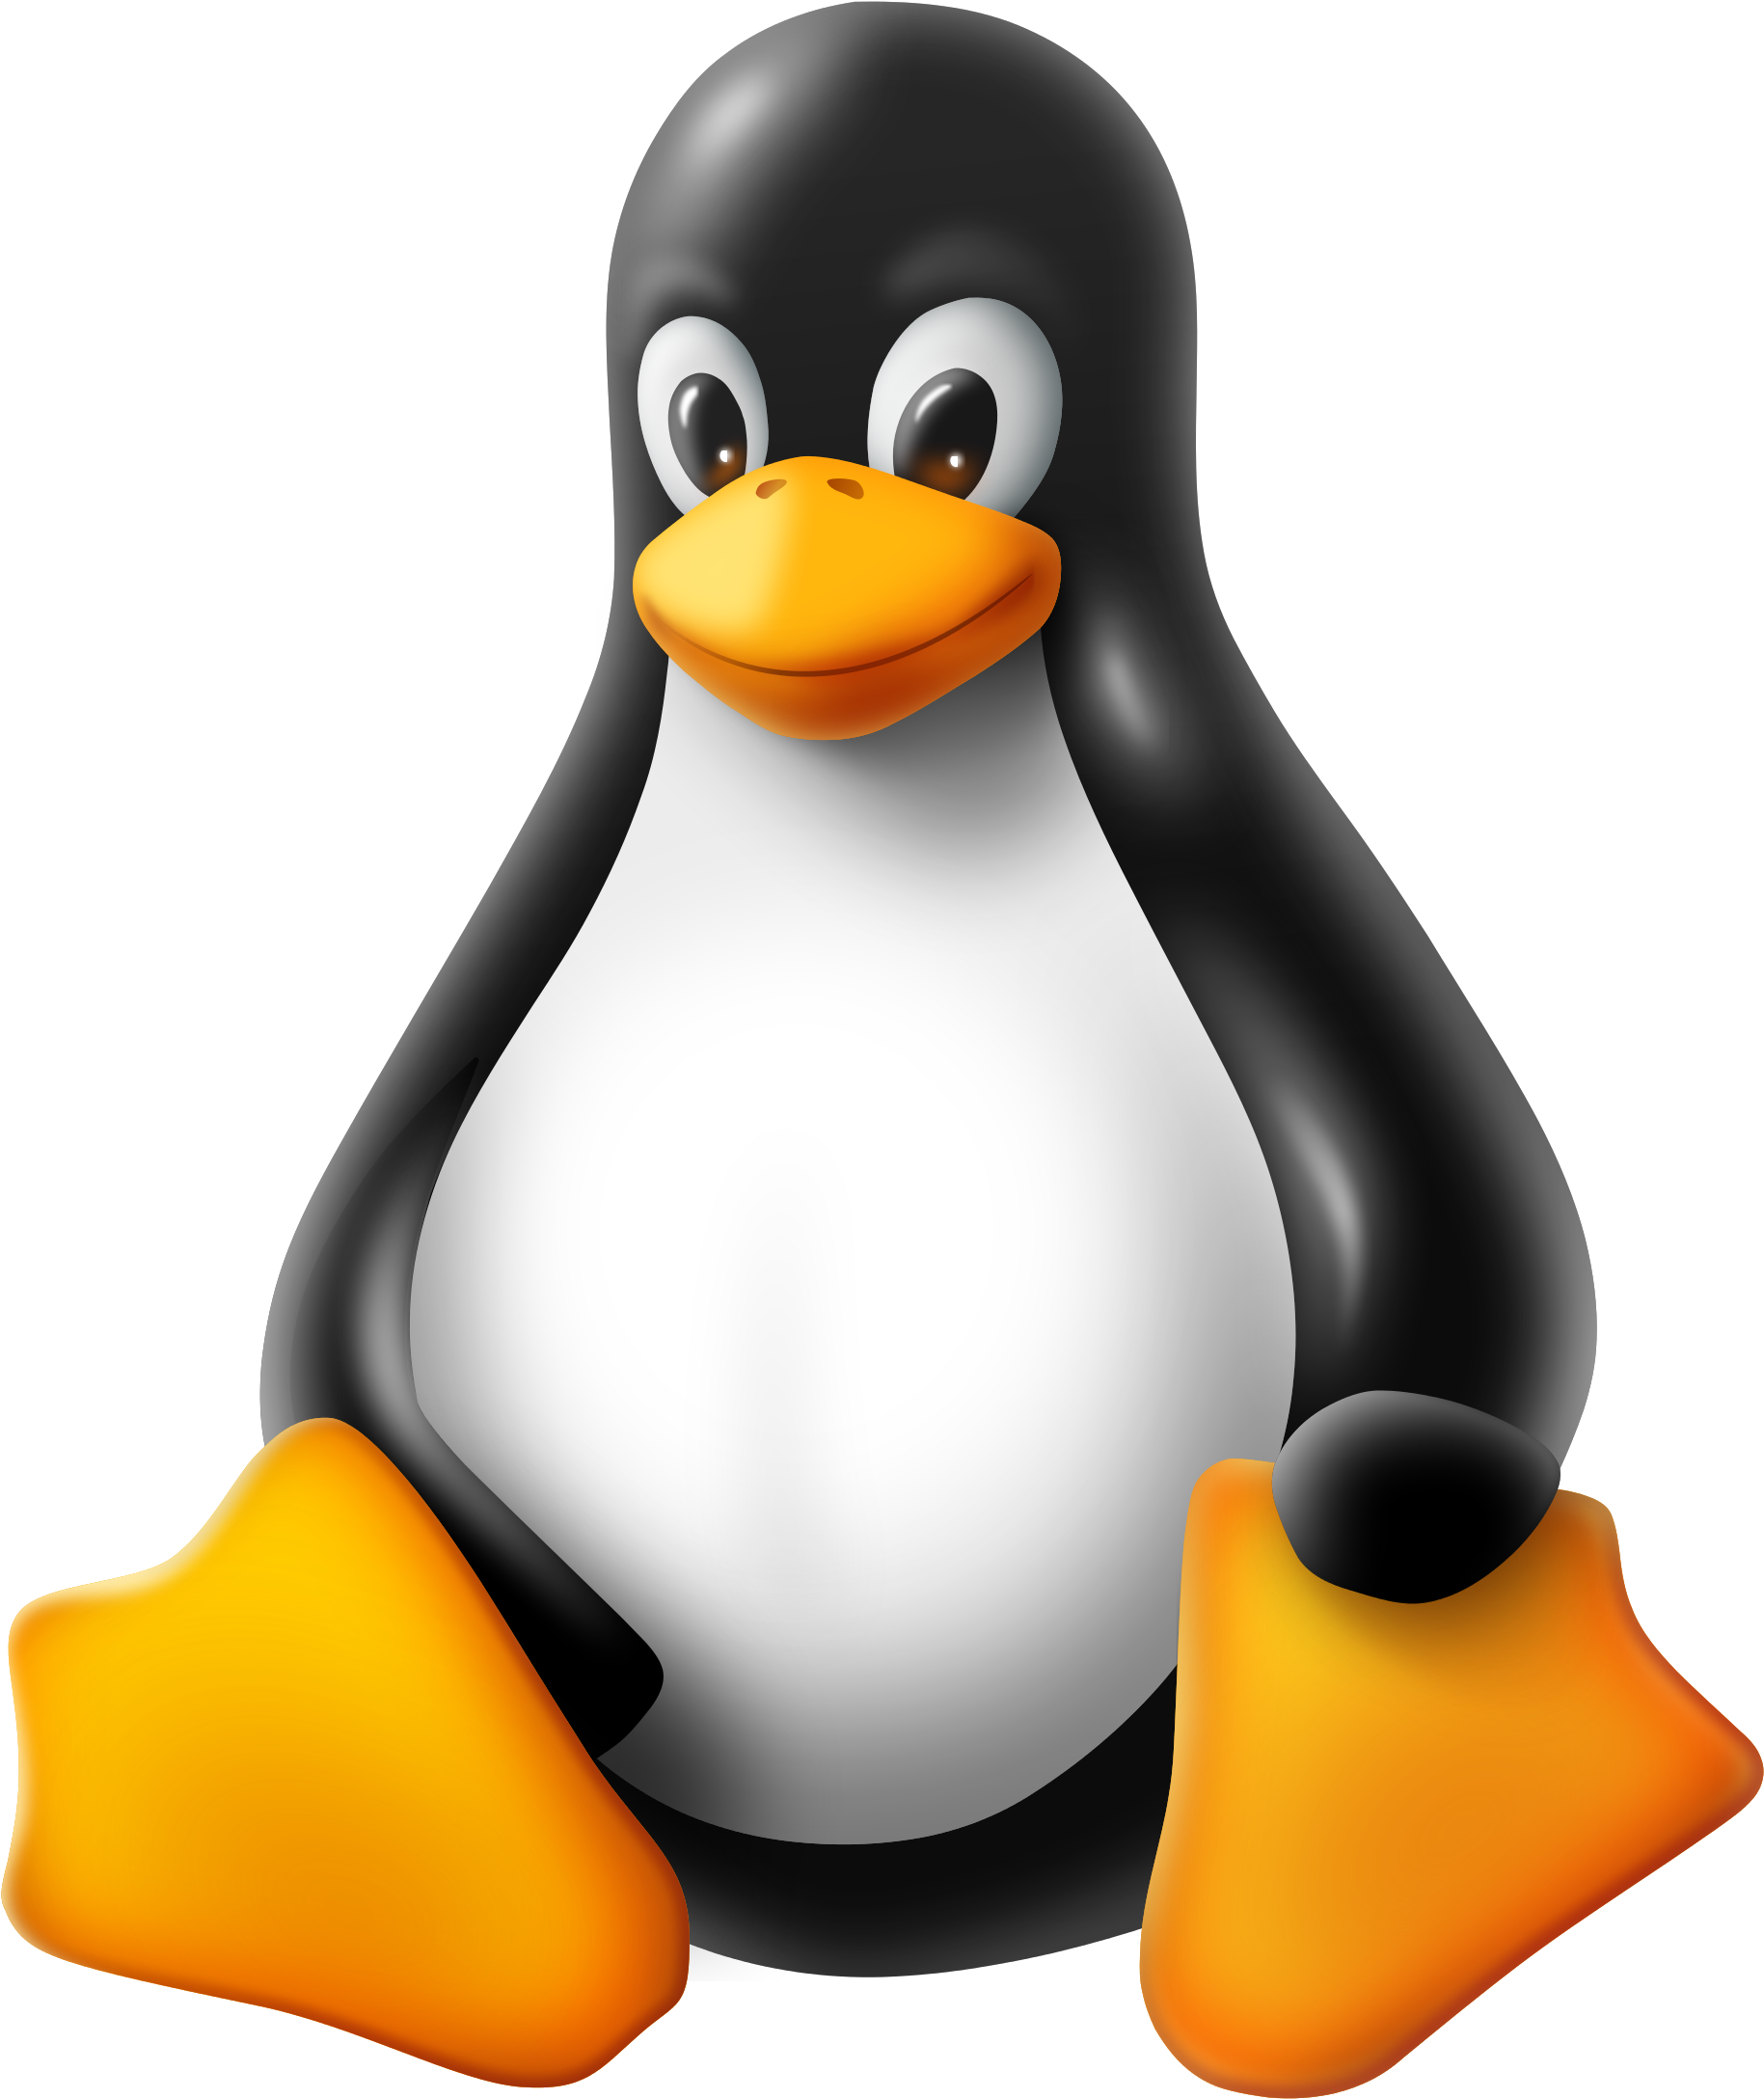 How To Install PHP In Linux